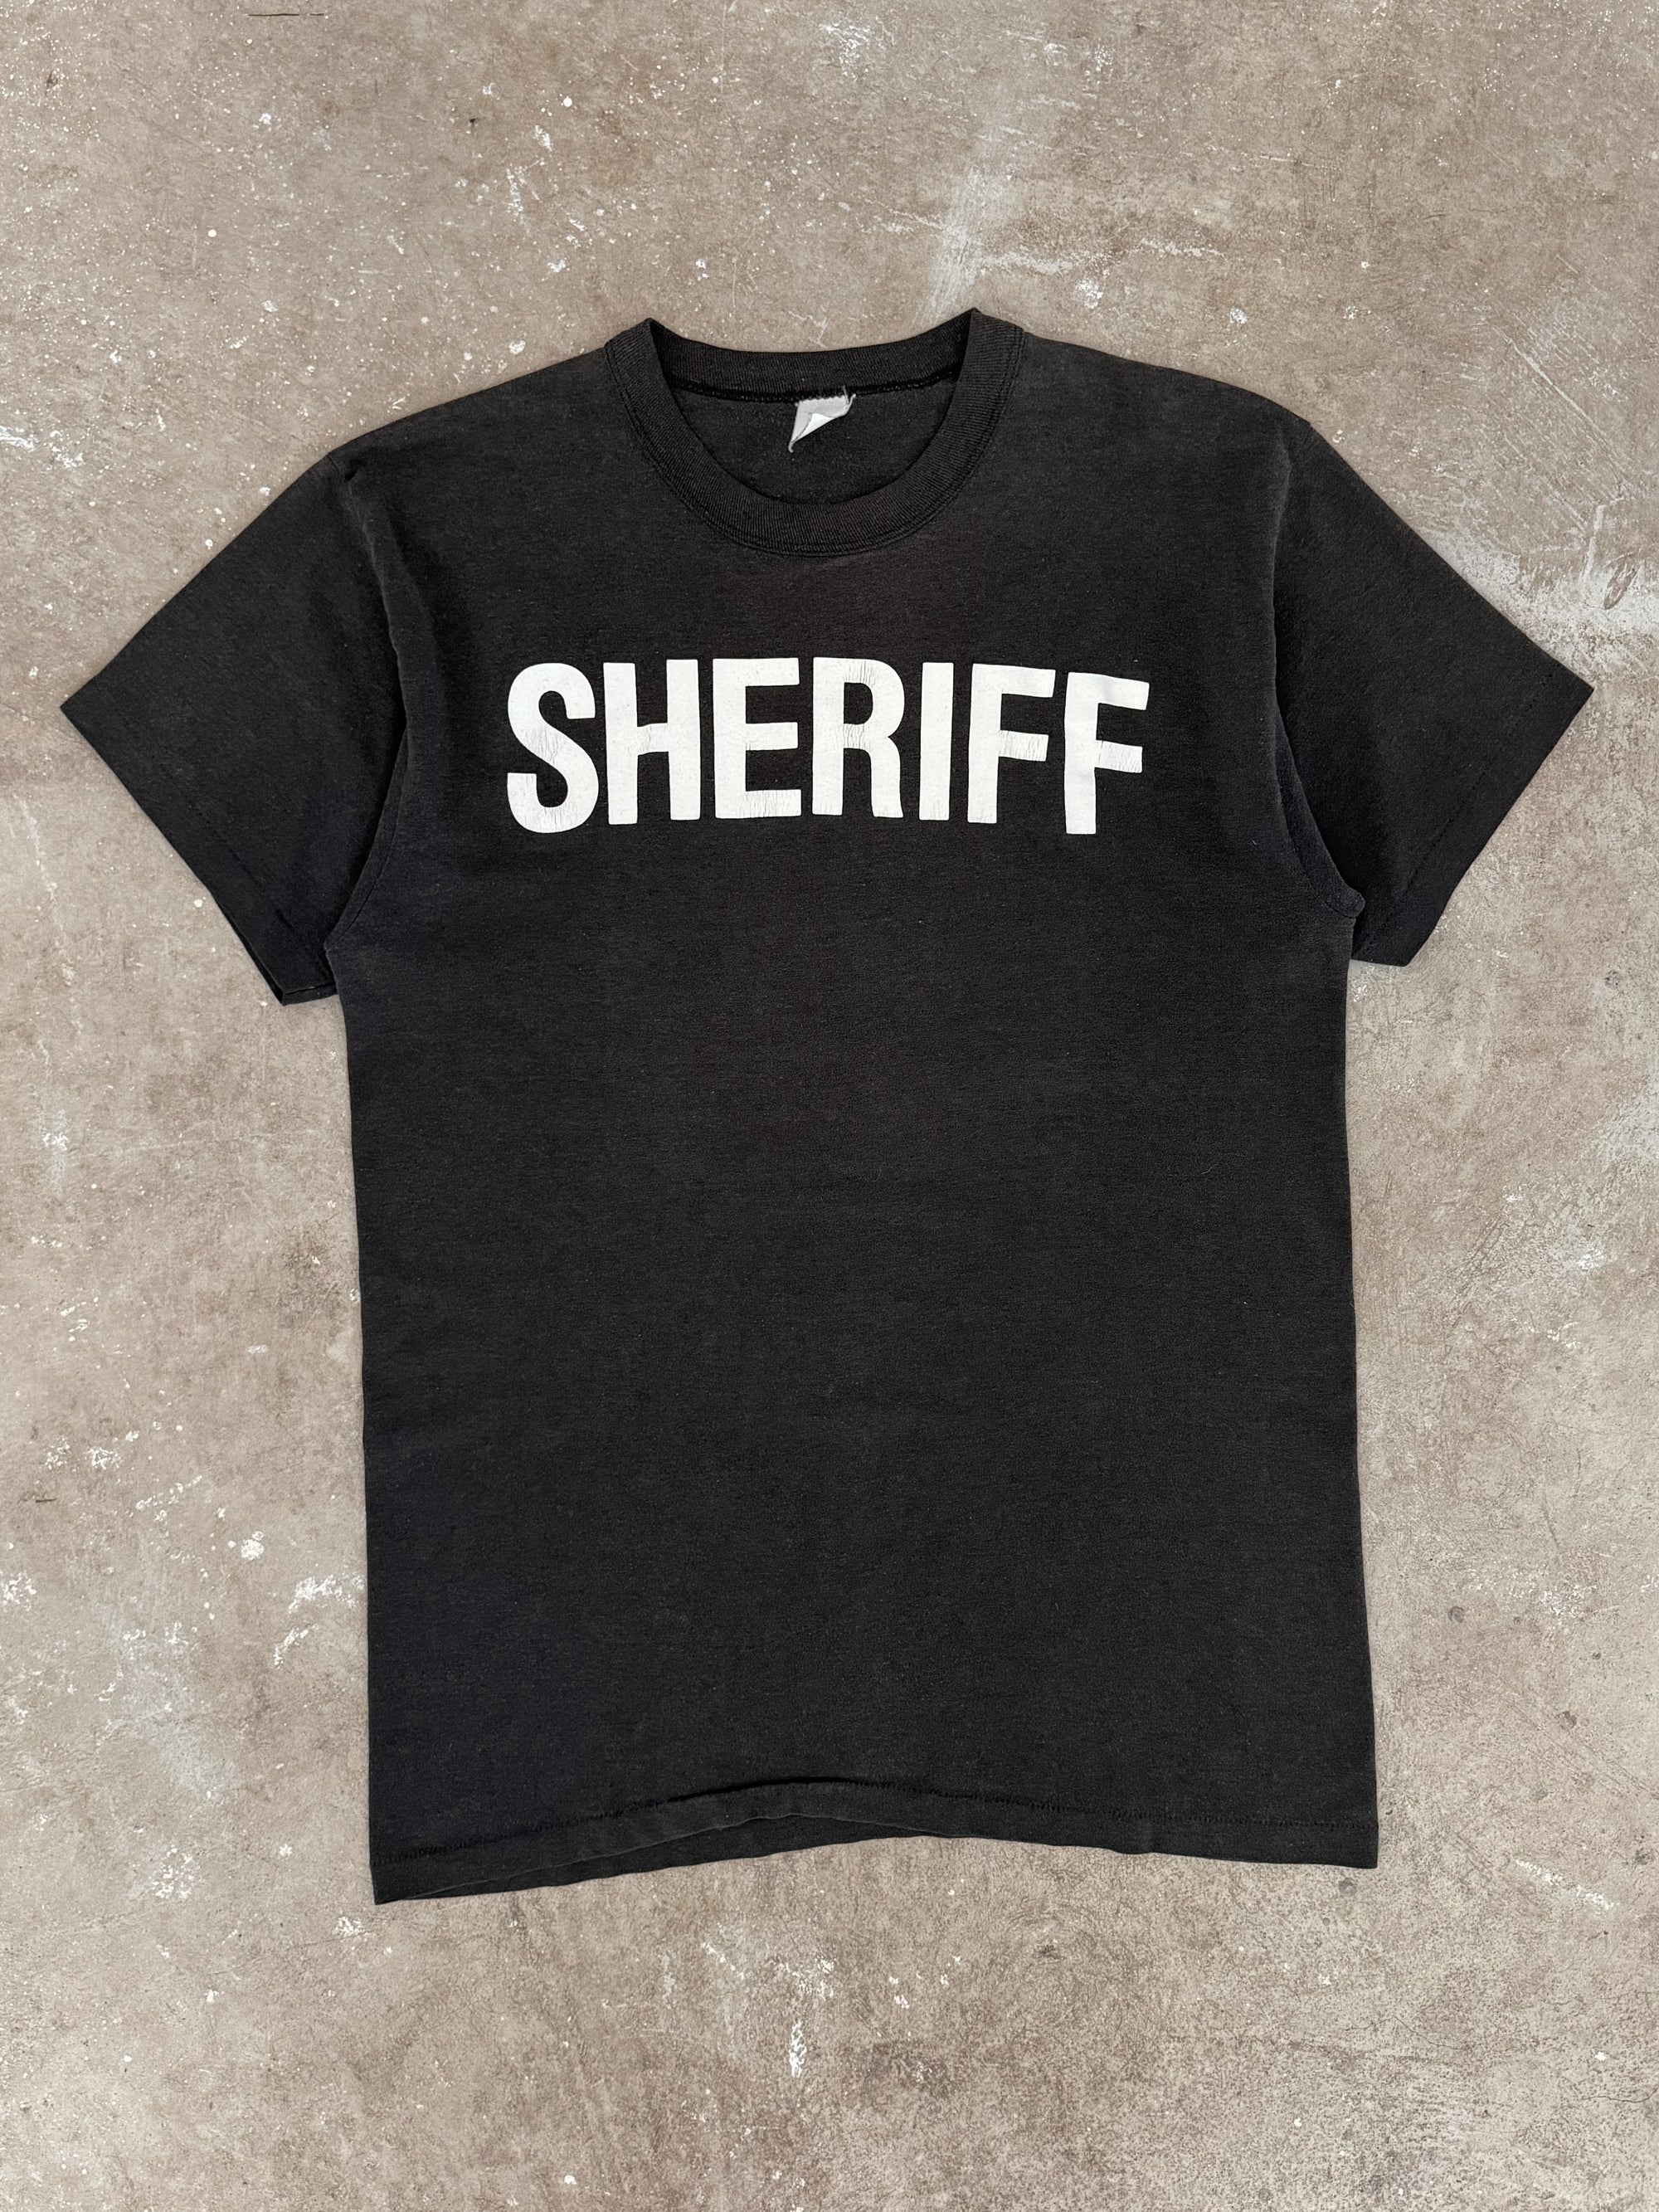 1980s "Sheriff" Faded Tee (S/M)